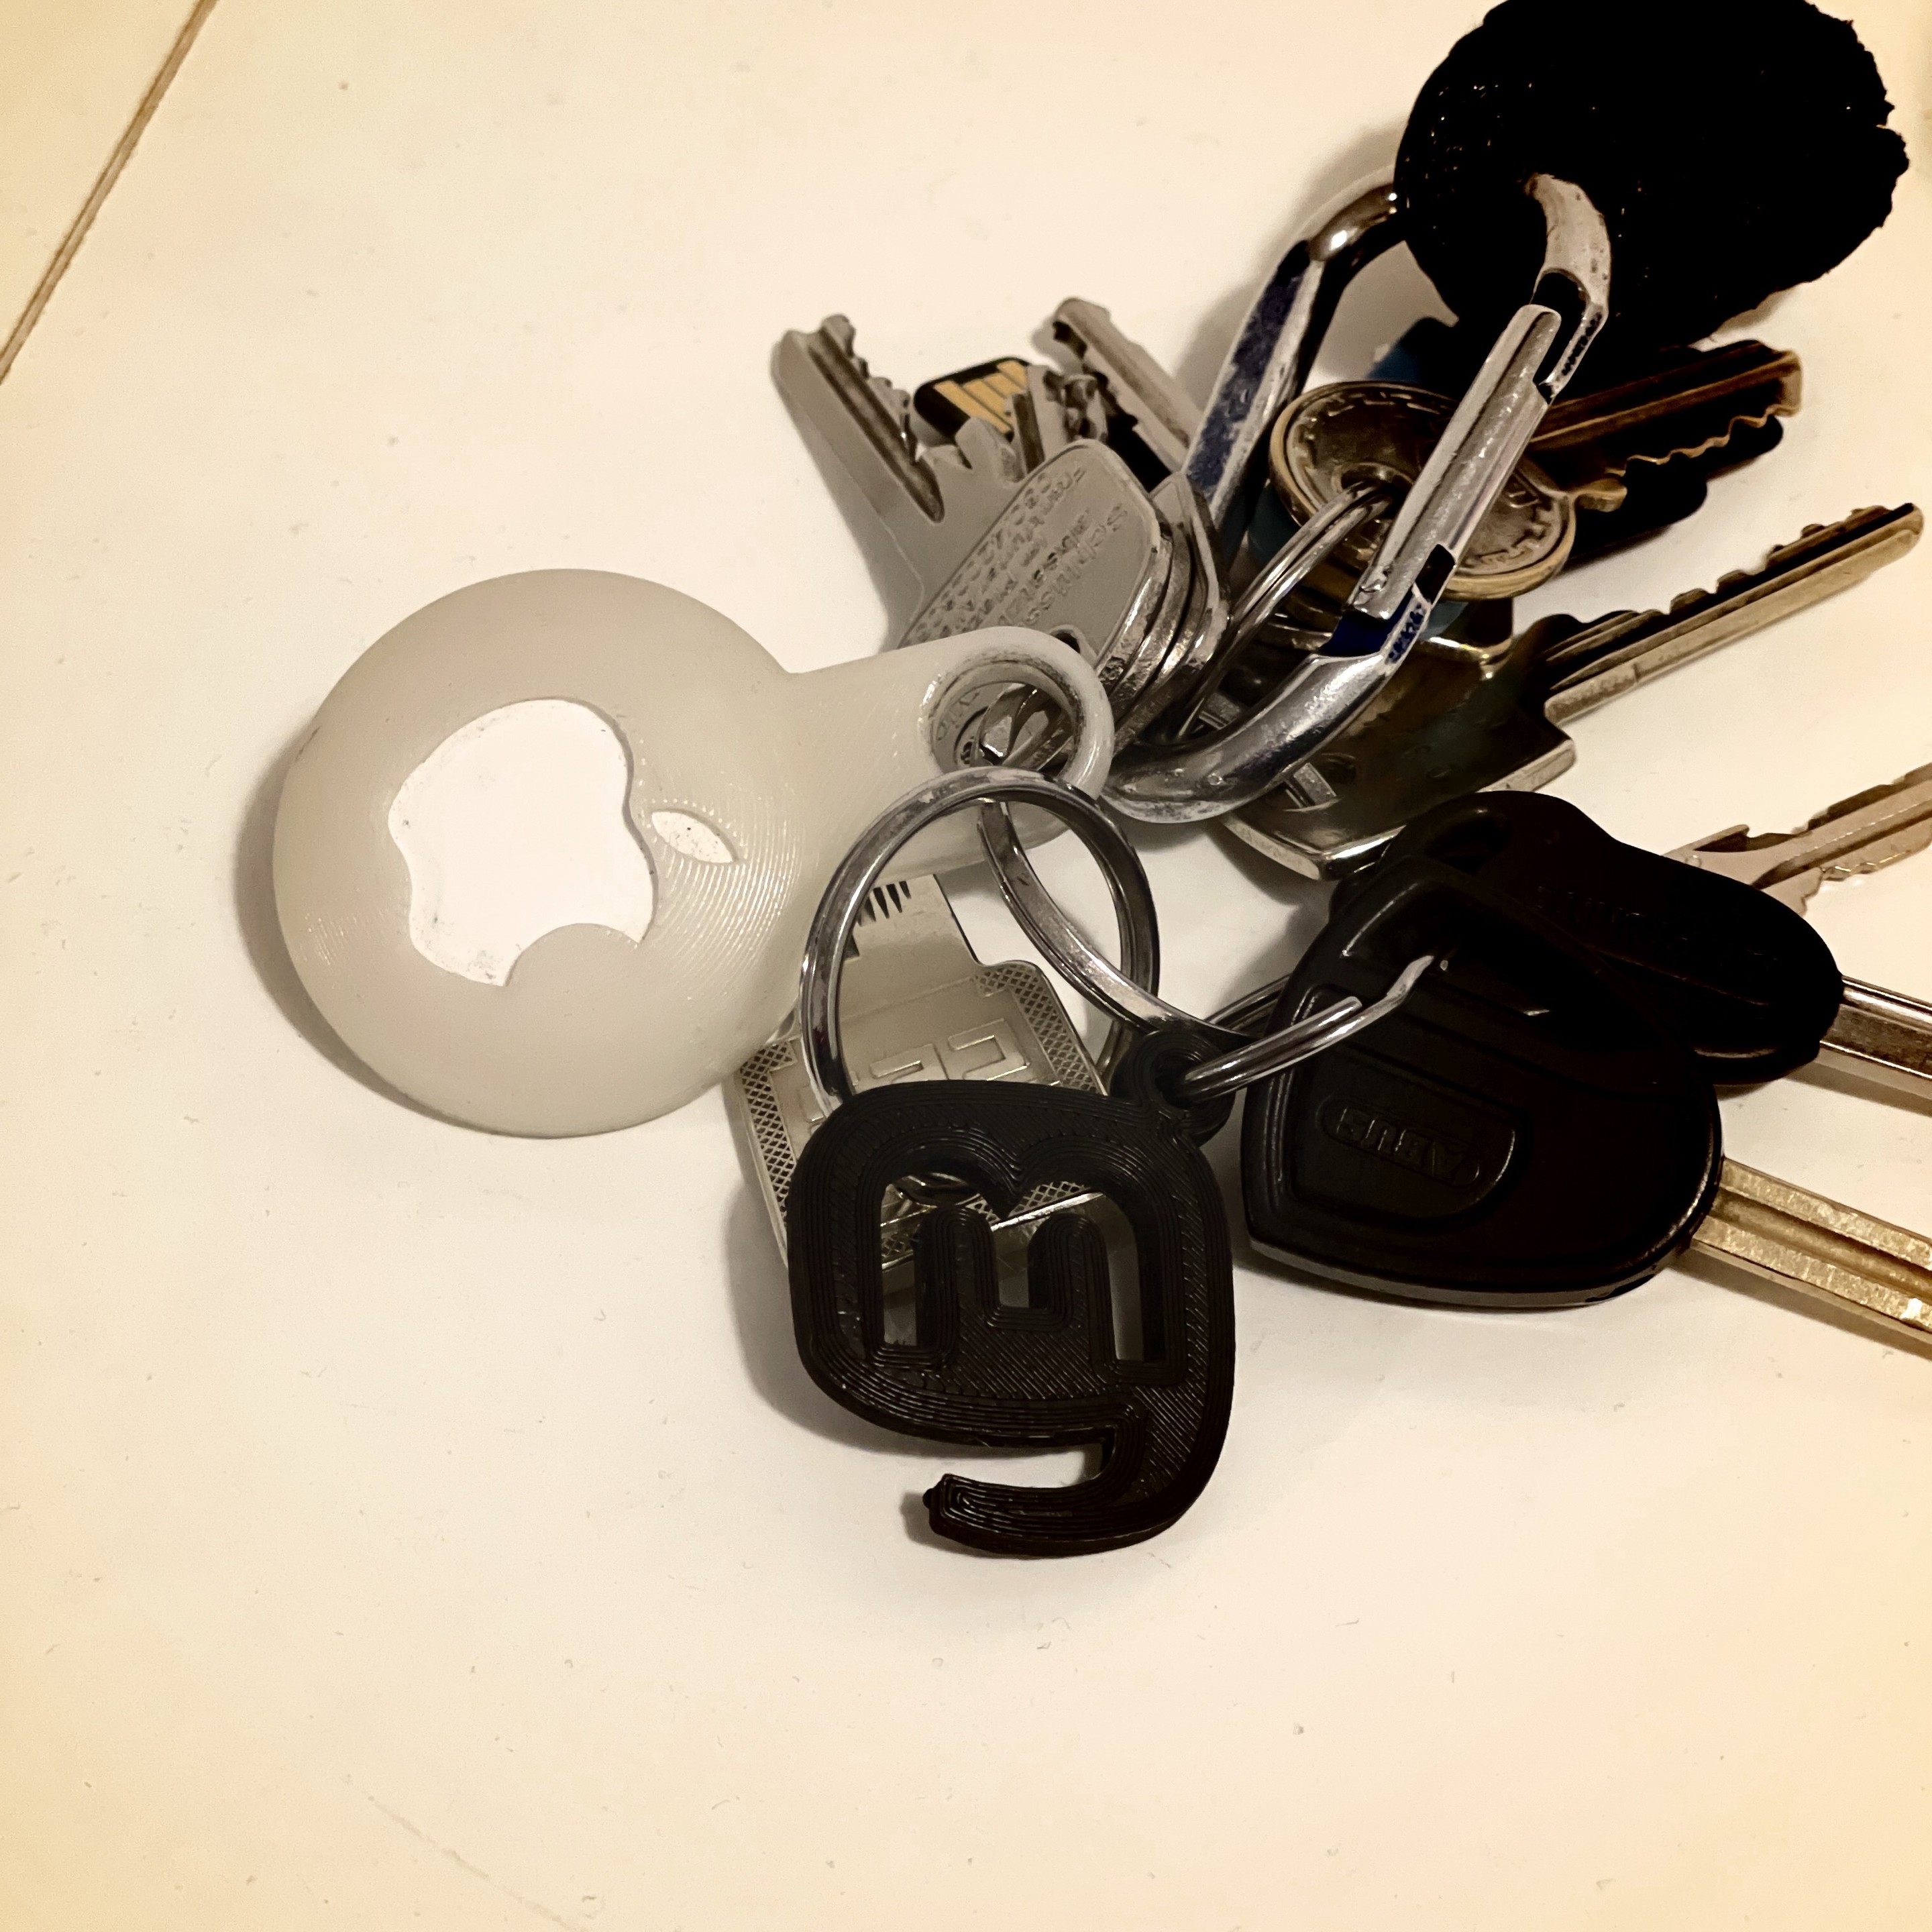 A bunch of keys with various keychains, including a black mastodon logo and a white one with a recognizable apple shape with a bite mark.